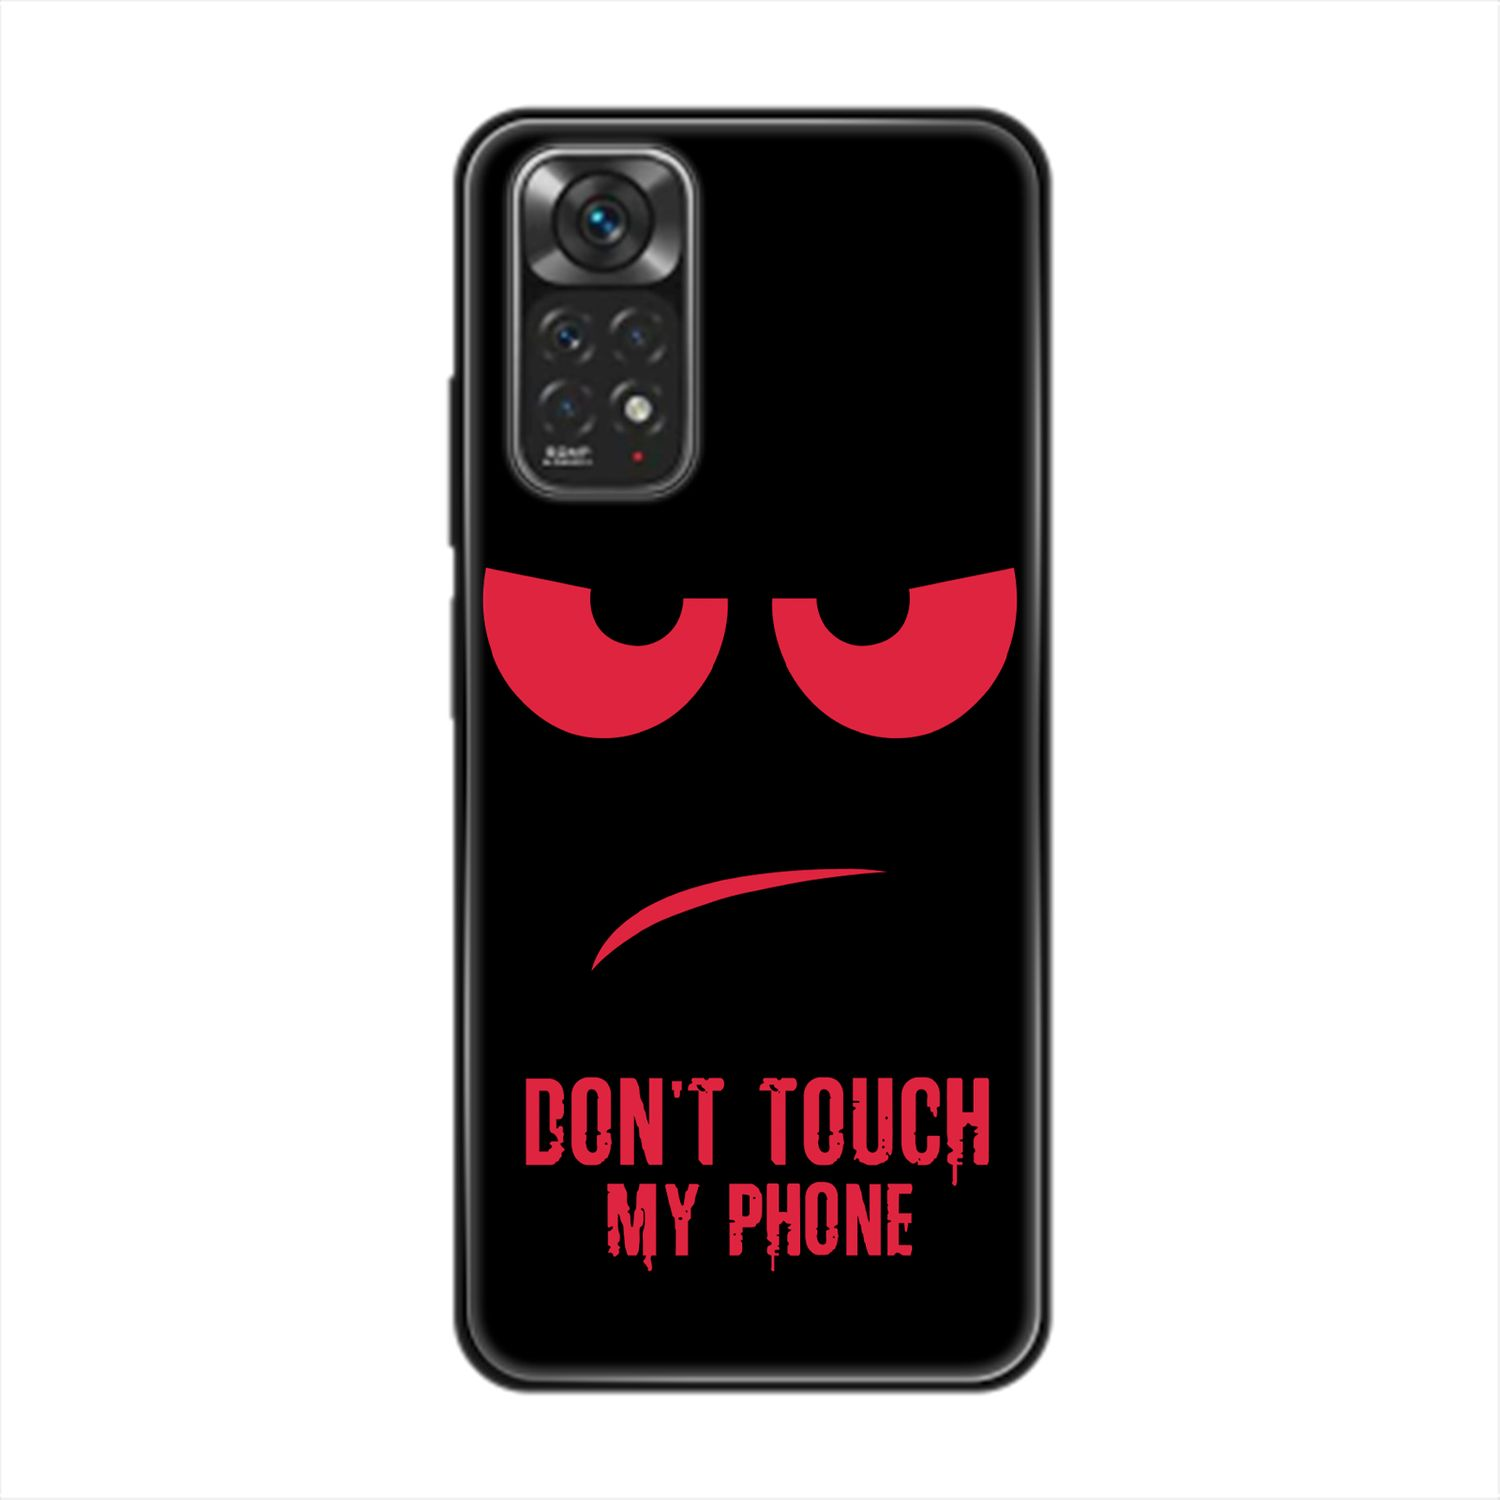 KÖNIG DESIGN Case, Backcover, 11, Rot Phone Touch Redmi Dont Xiaomi, Note My